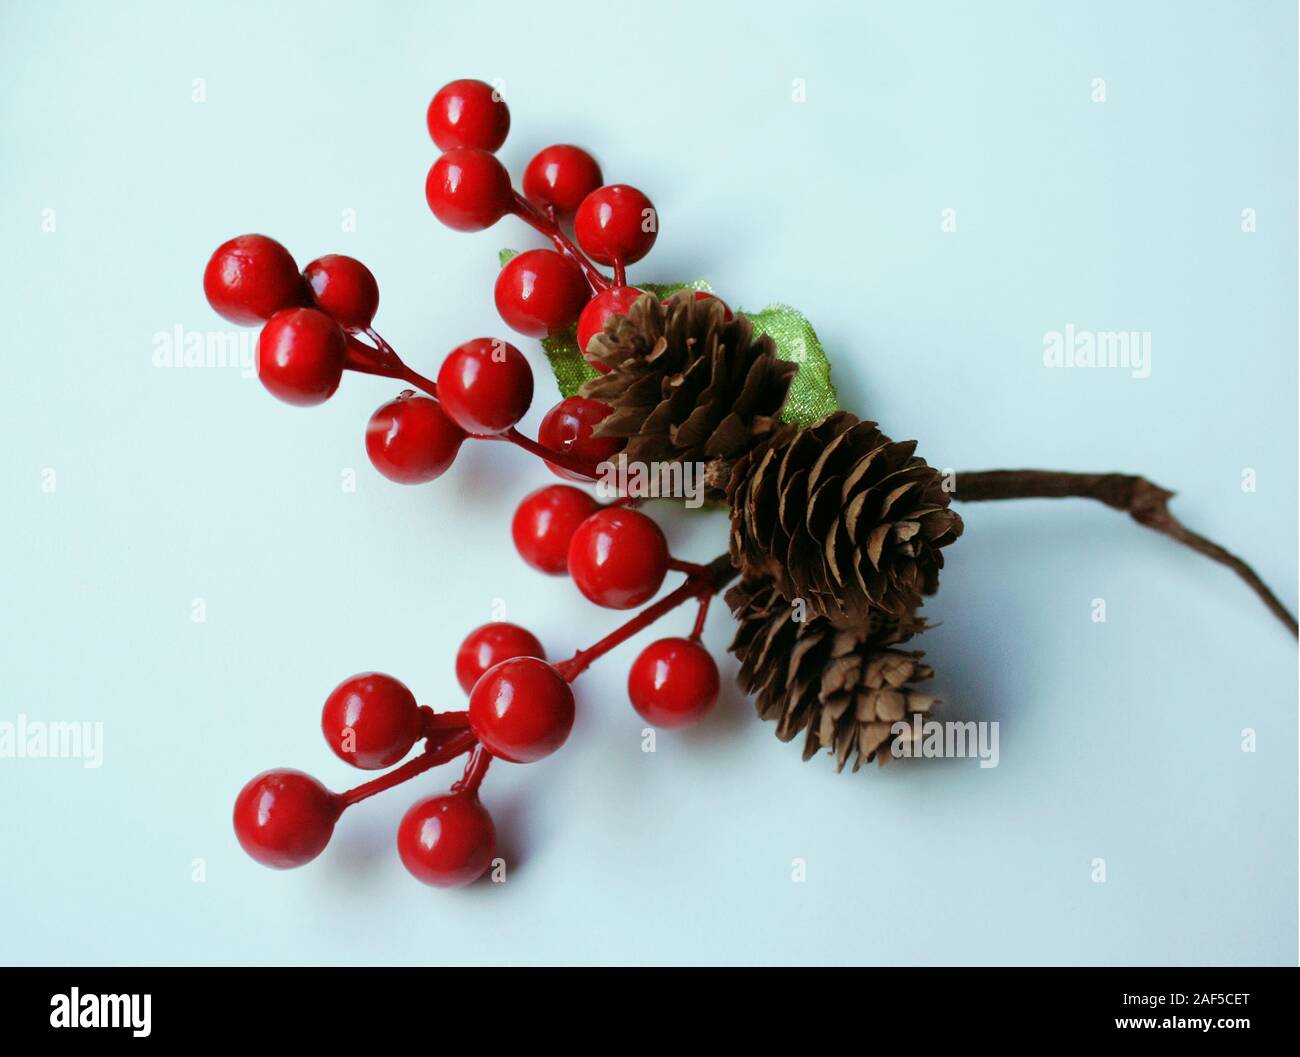 Beautiful close up of a decor of hawthorn sprig with red berries and three pine cones on a white background Stock Photo